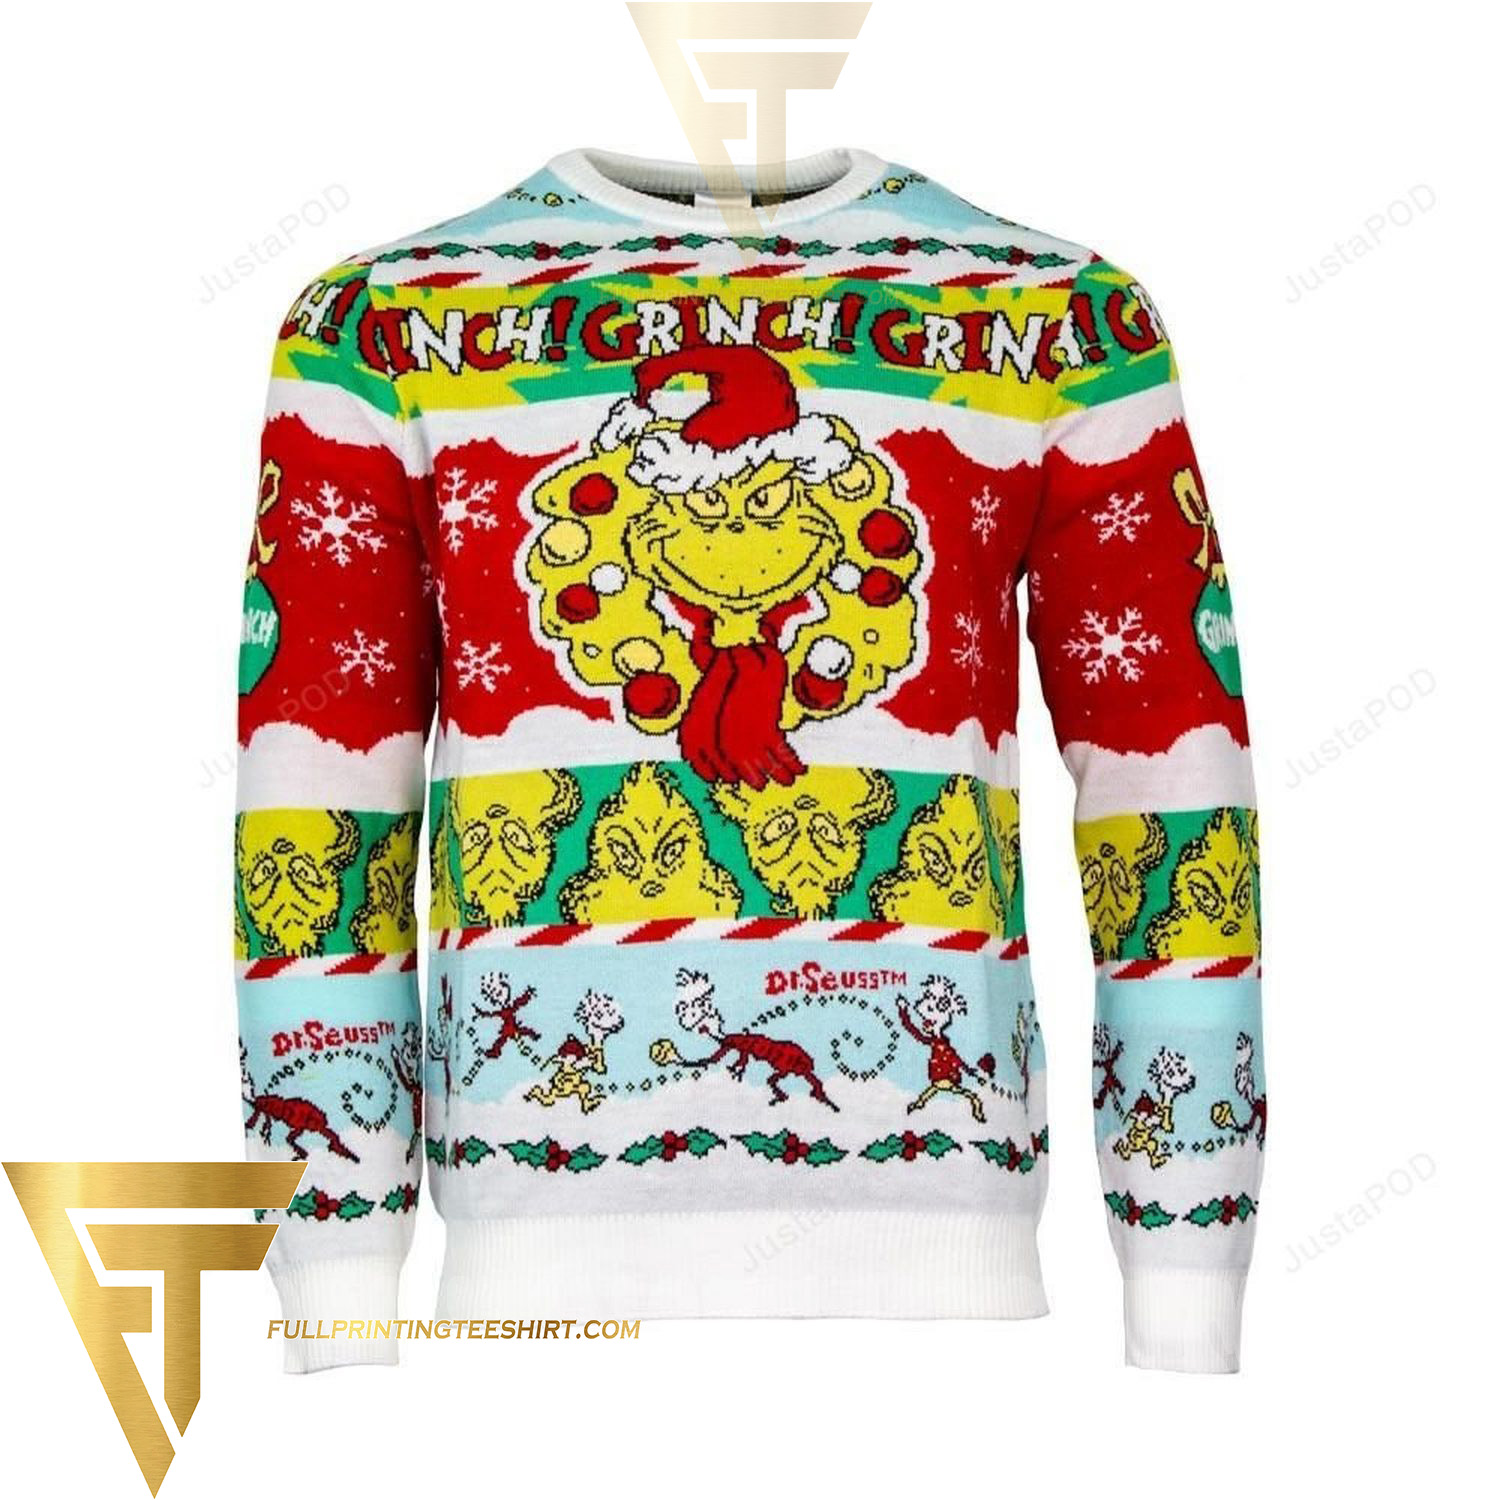 The The Grinch Holiday Party Ugly Christmas Sweater